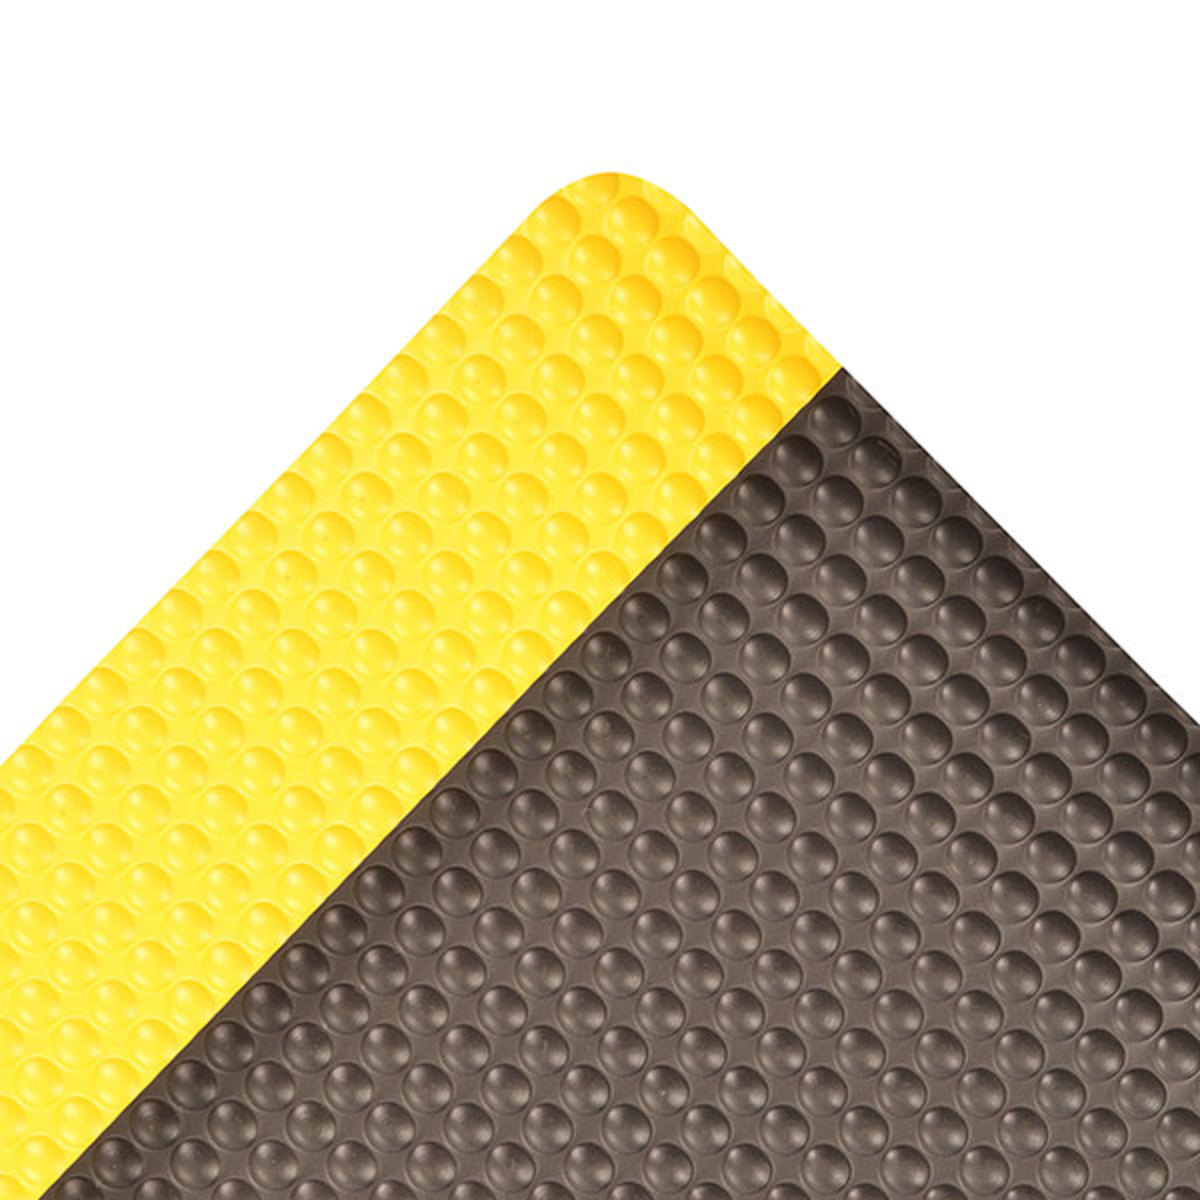 Superior Manufacturing 3' X 5' Black With Yellow Edge Vinyl NoTrax® Bubble Trax® Anti-Fatigue Floor Mat